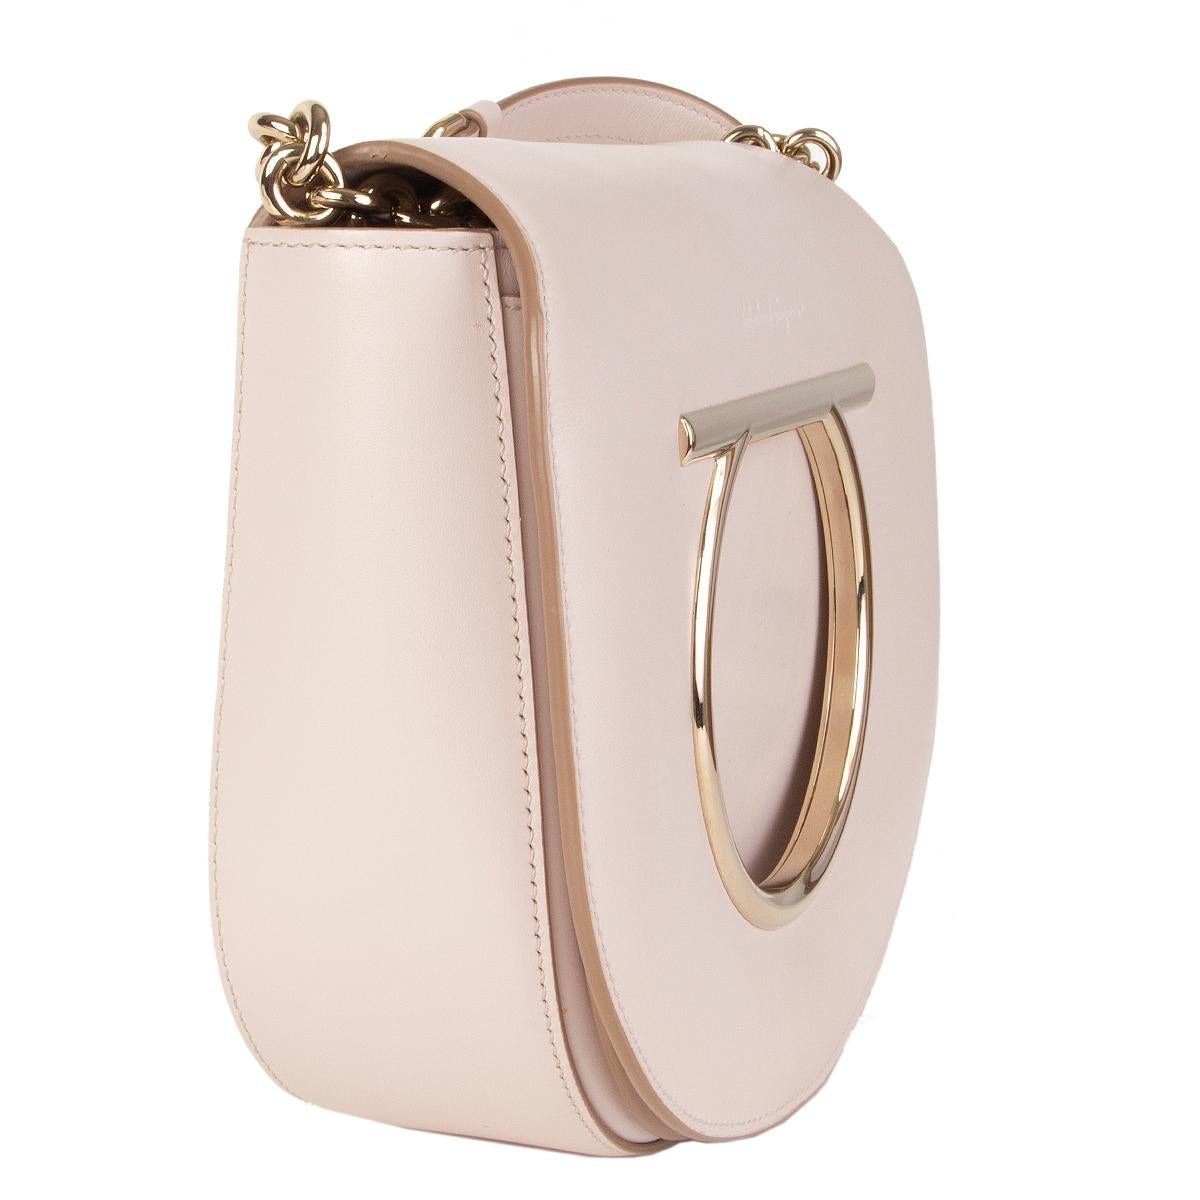 100% authentic Salvatore Ferragamo 'Vela' shoulder bag in pale nude calfskin. Opens with a flap with snap closure featuring the brand's iconic 'Gancio' embellishment in light gold-tone. It features a long adjustable shoulder strap with a chain